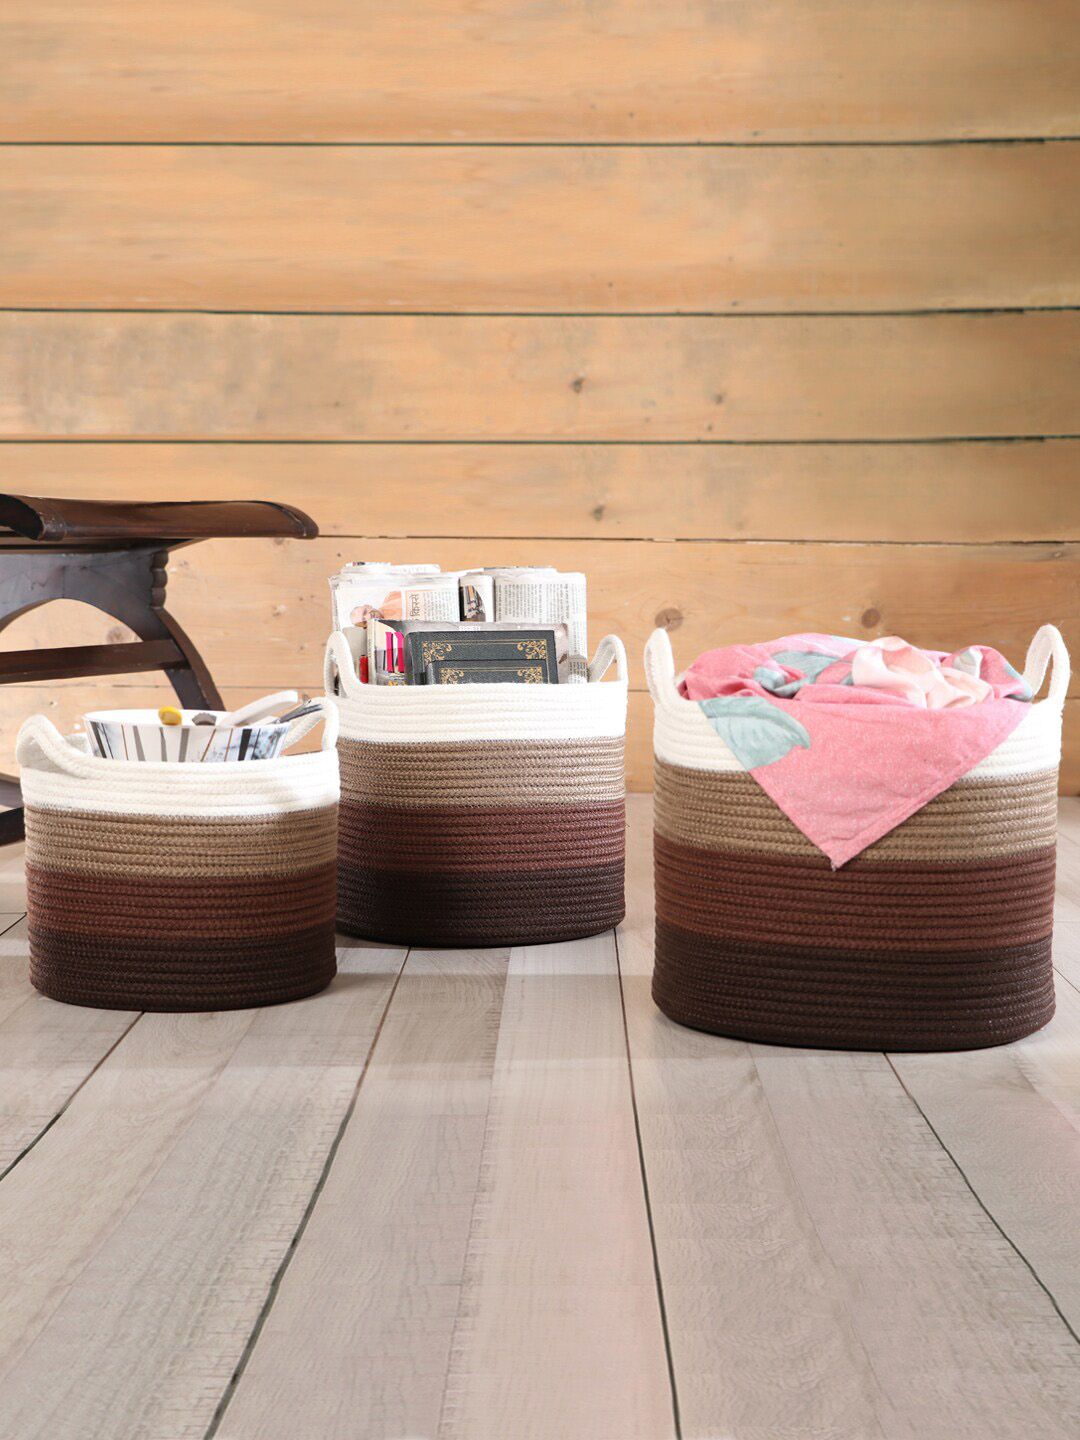 Pano Brown & White Striped Patterned Bamboo Round Storage Basket Price in India